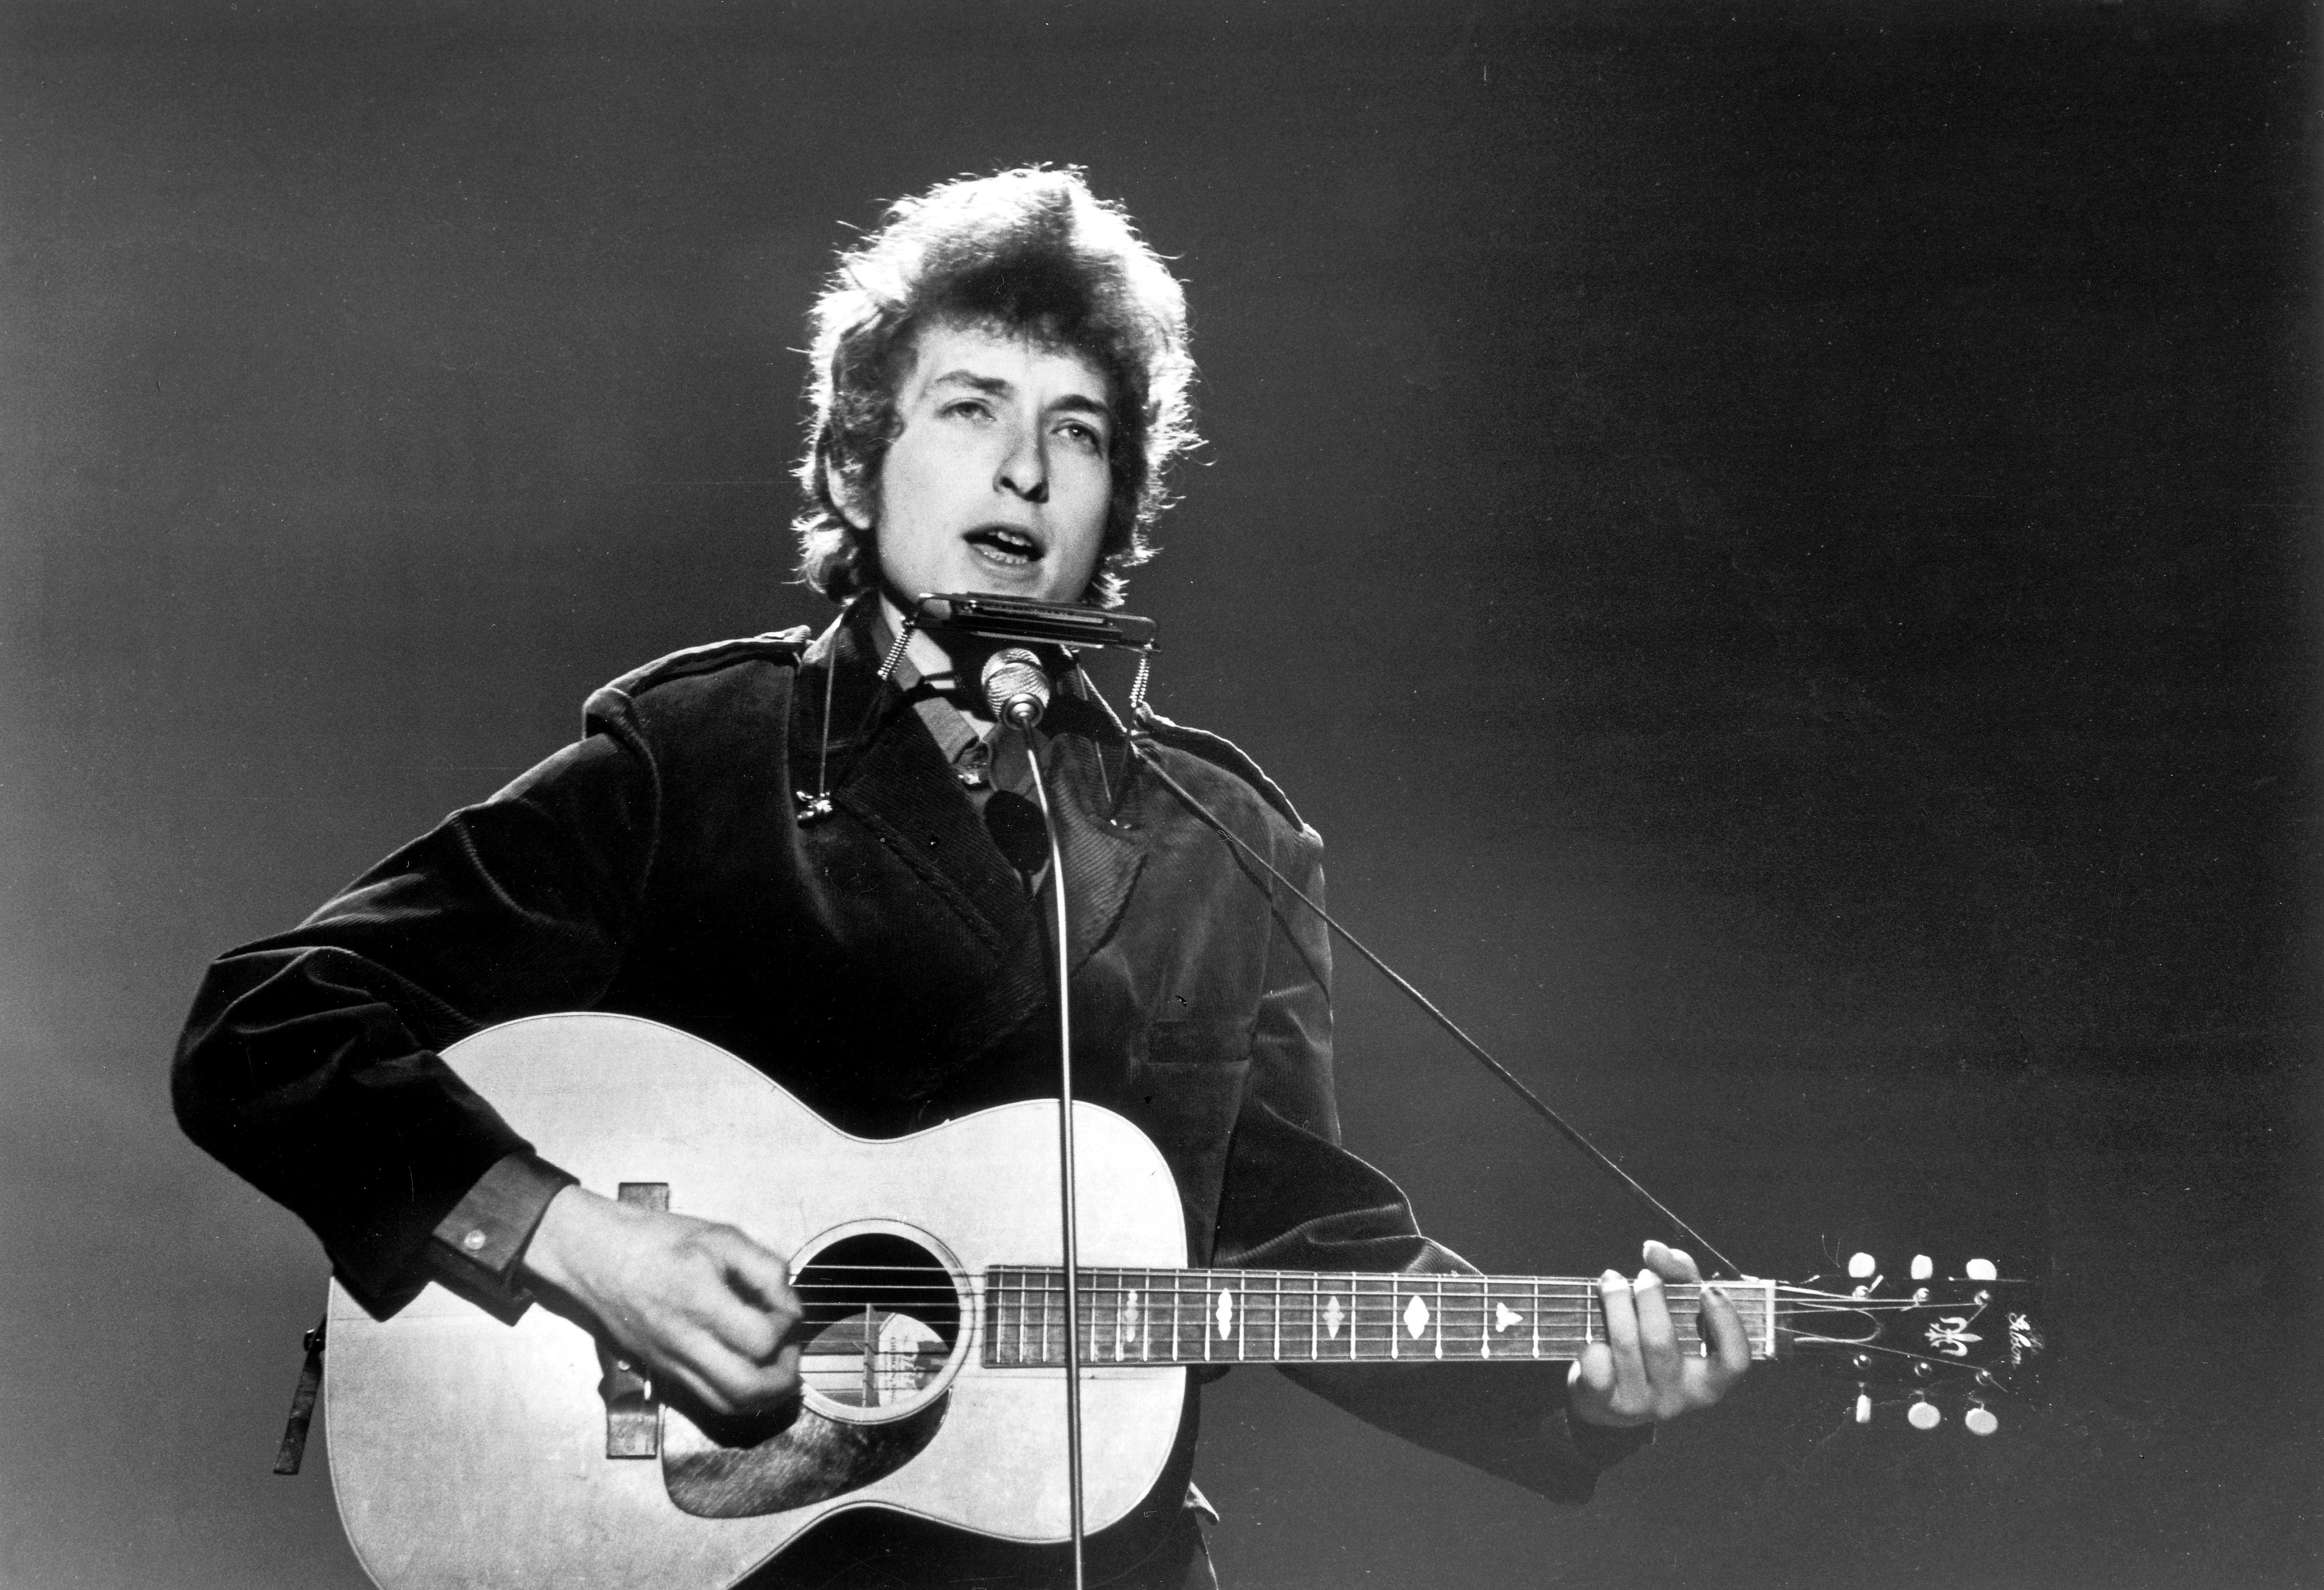 Bob Dylan performing at BBC TV Center, London, 1965 | Photo: Getty Images 